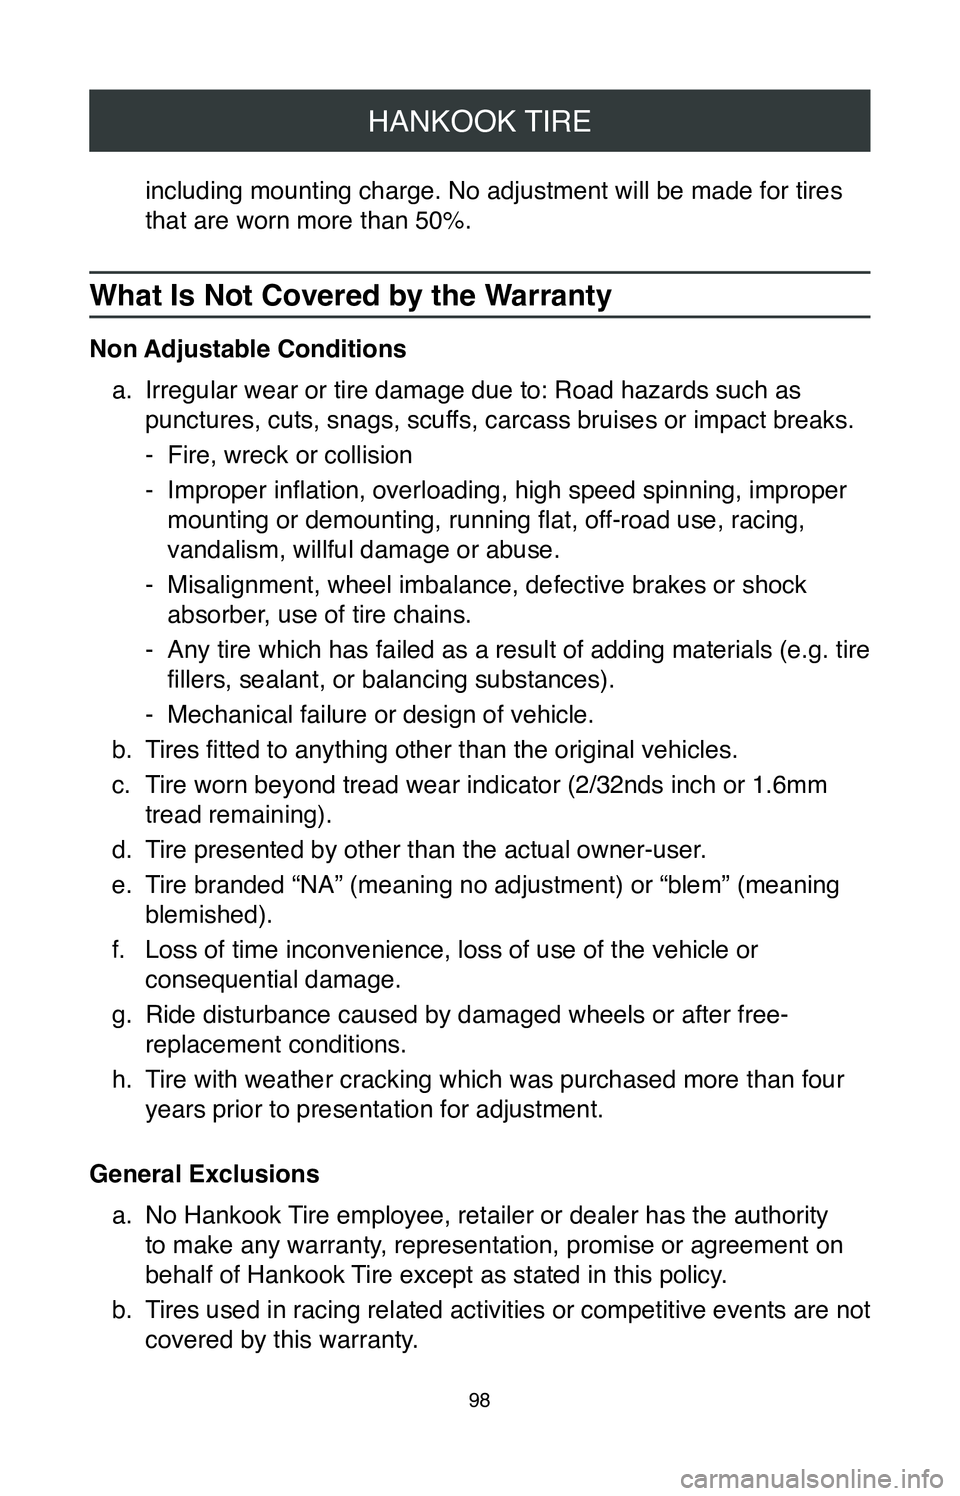 TOYOTA TUNDRA 2020  Warranties & Maintenance Guides (in English) HANKOOK TIRE
98
including mounting charge. No adjustment will be made for tires 
that are worn more than 50%.
What Is Not Covered by the Warranty
Non Adjustable Conditionsa.
 Irregular wear or tire da